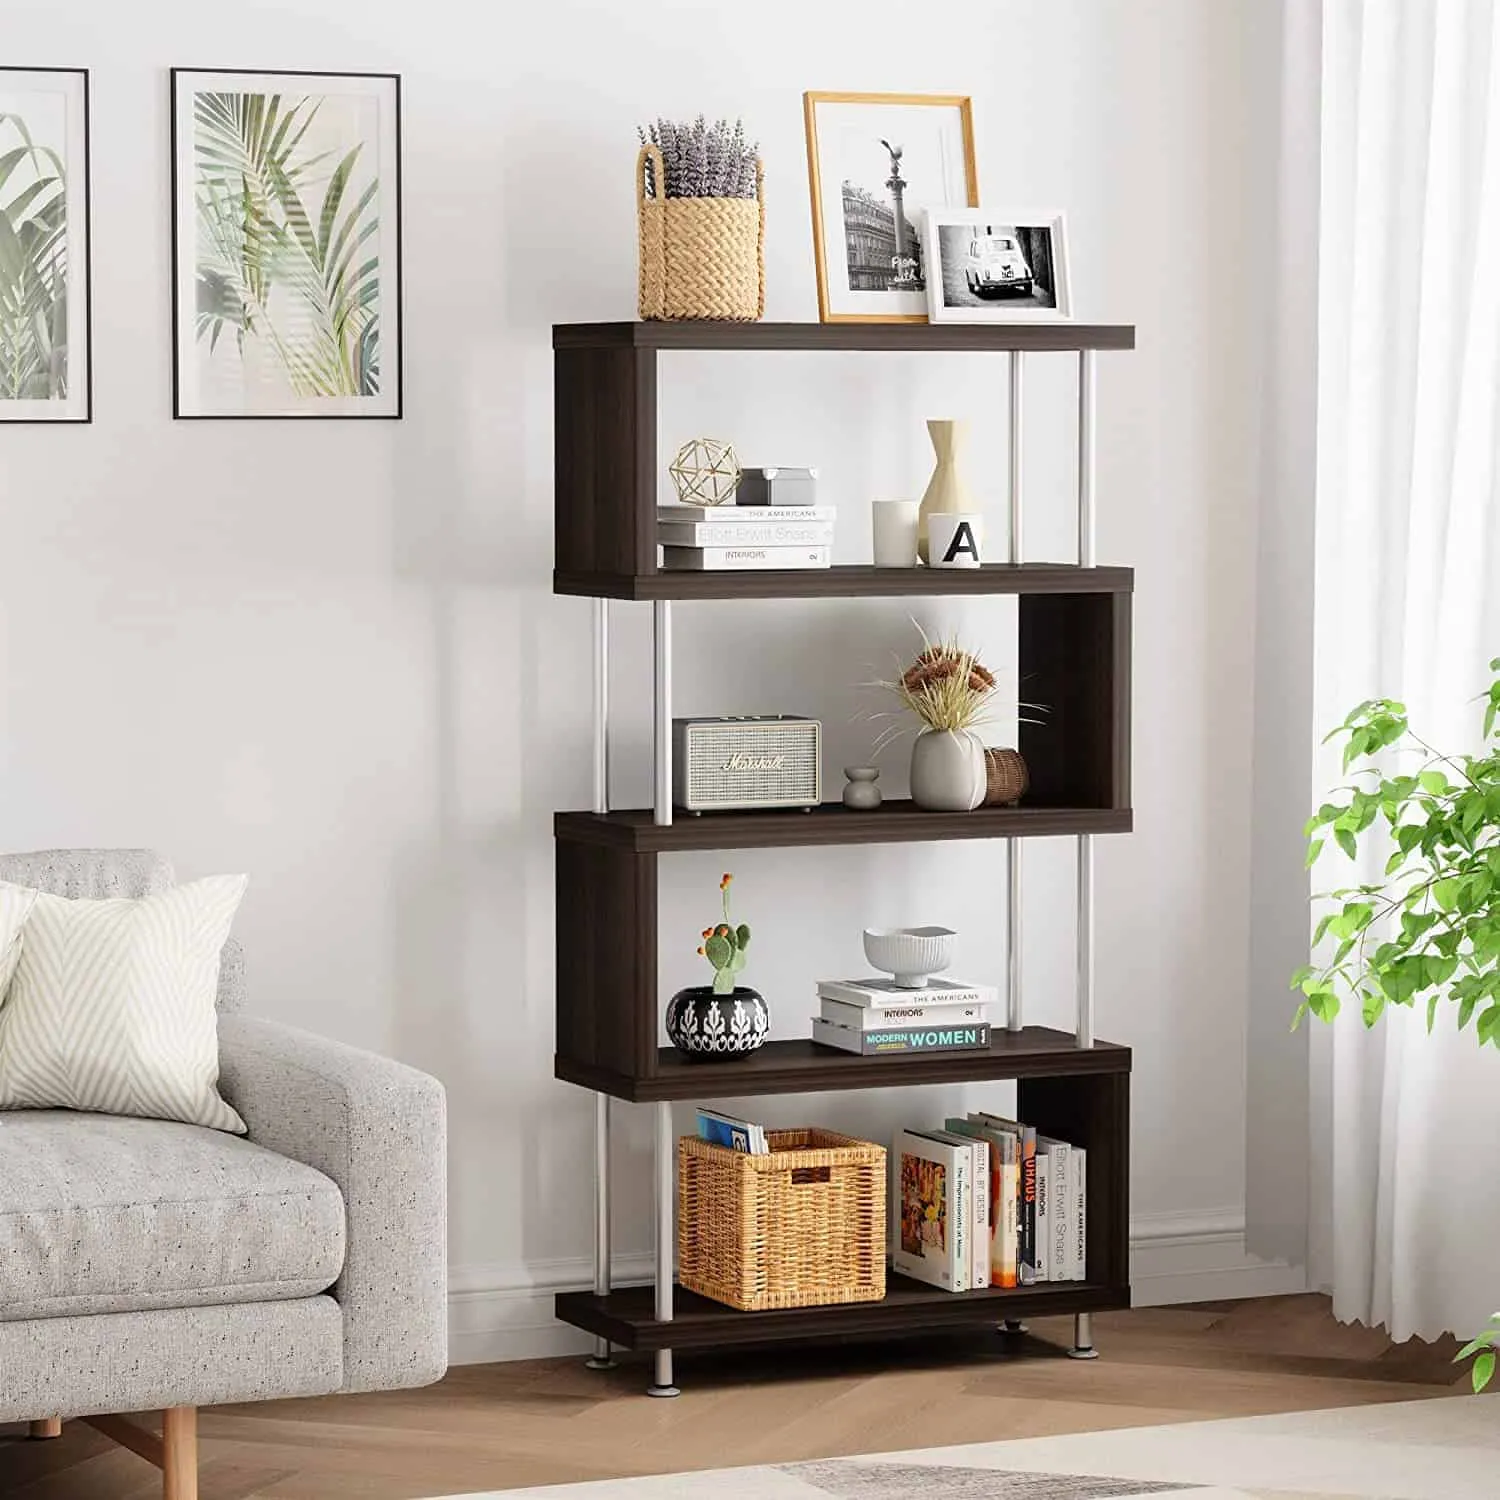 dark brown zigzag bookcase, articles and books arranged, room setting, sofa, wall hangings